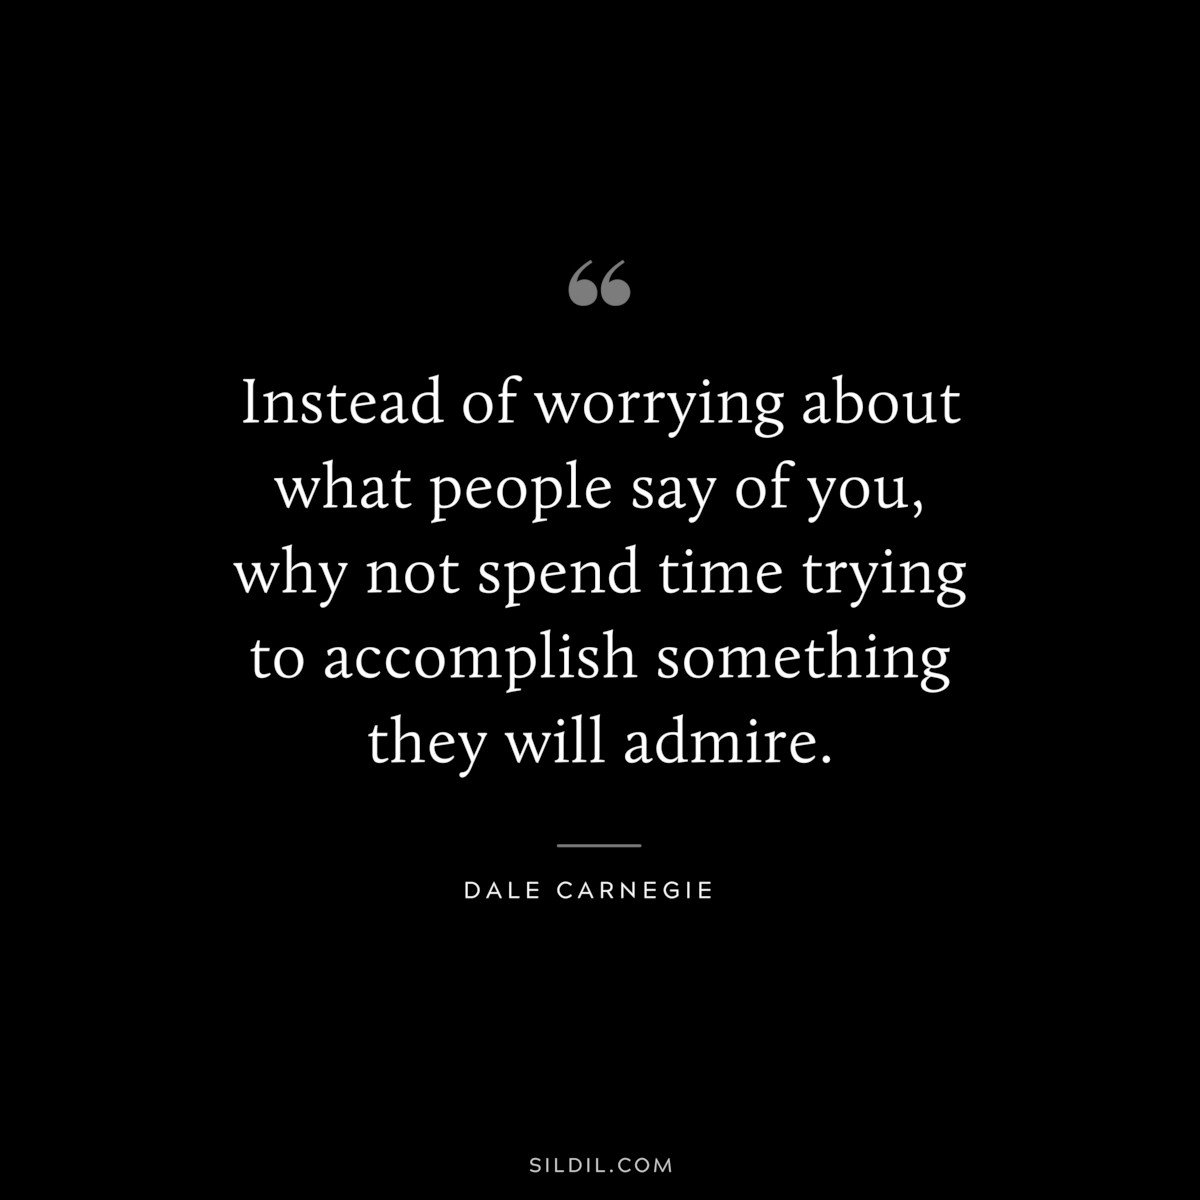 Instead of worrying about what people say of you, why not spend time trying to accomplish something they will admire.― Dale Carnegie